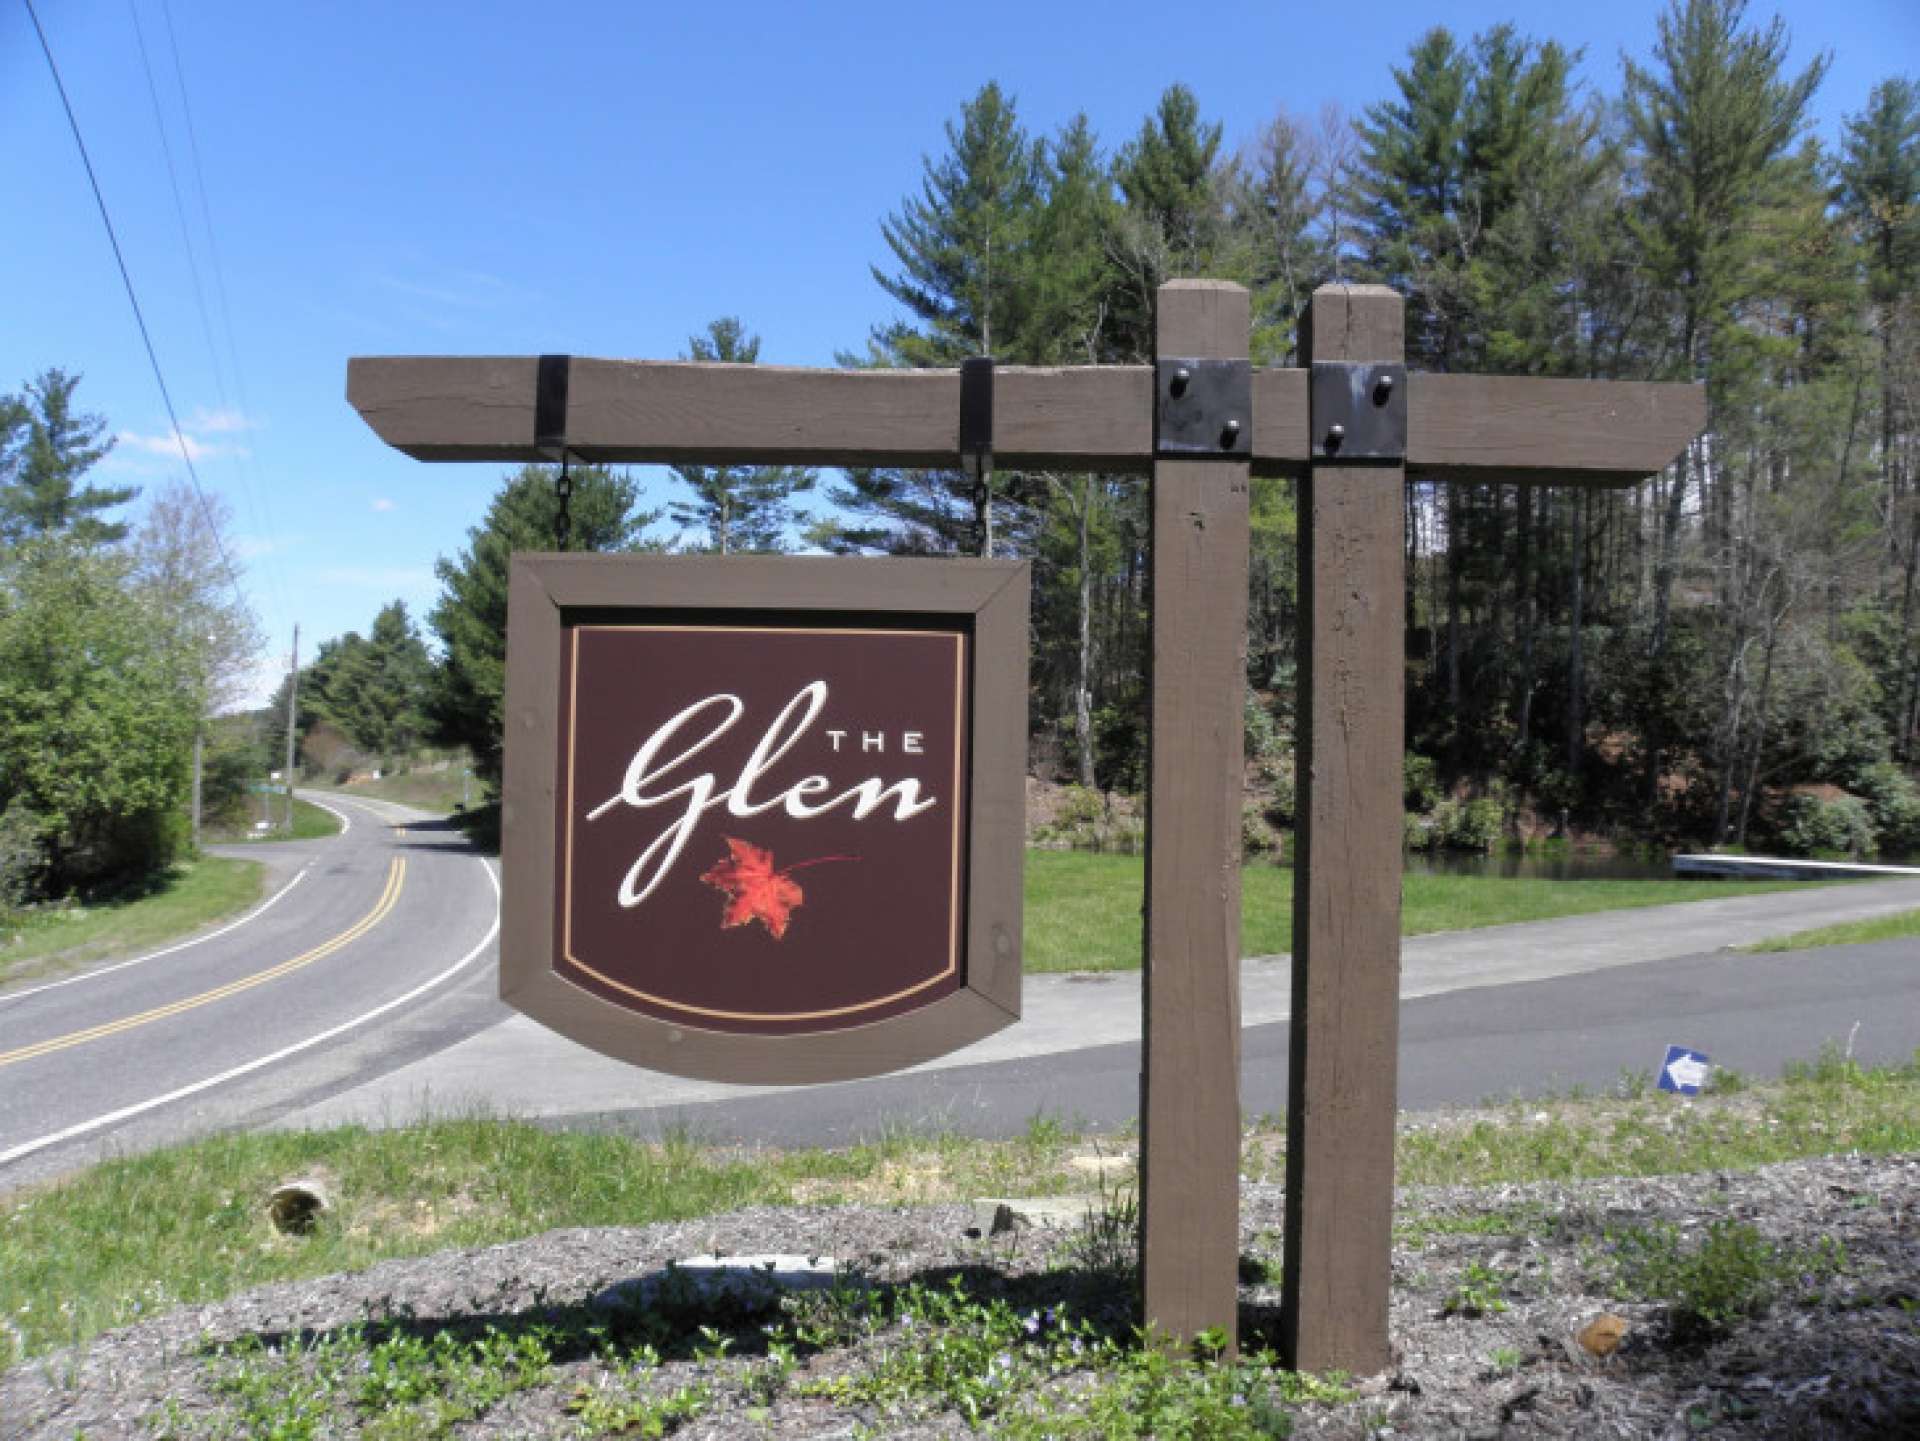 Looking for an affordable home site for your Eastern Ashe County mountain retreat?  Then take a look at this NC Mountain home site located in The Glen at Calloway Gap.